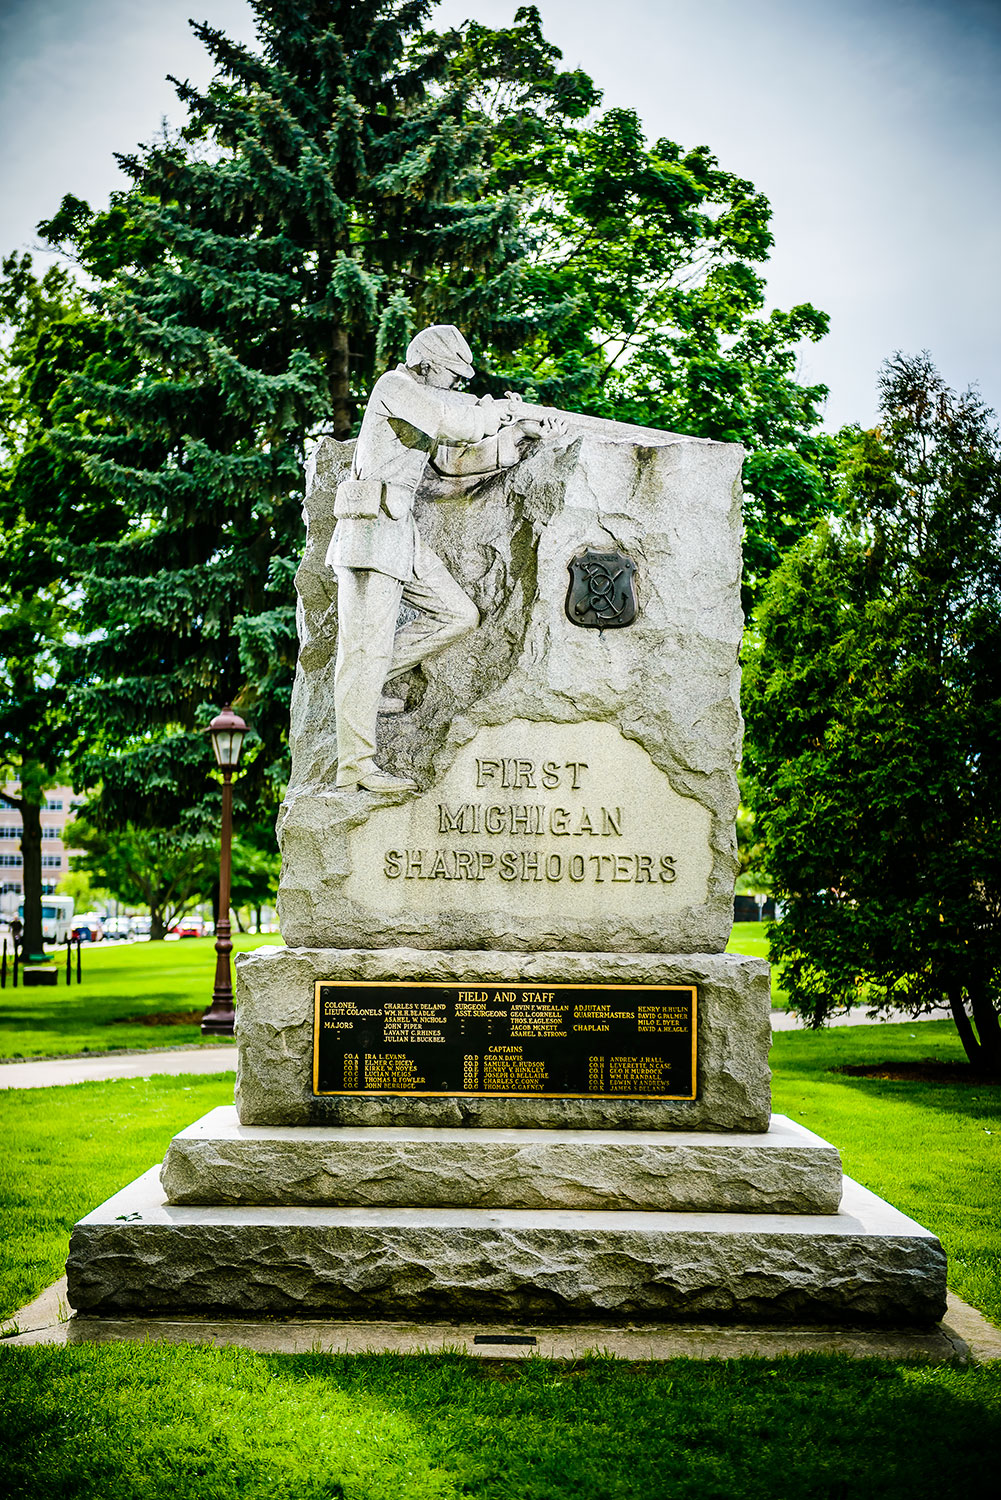 First Michigan Sharpshooters Monument sculpture